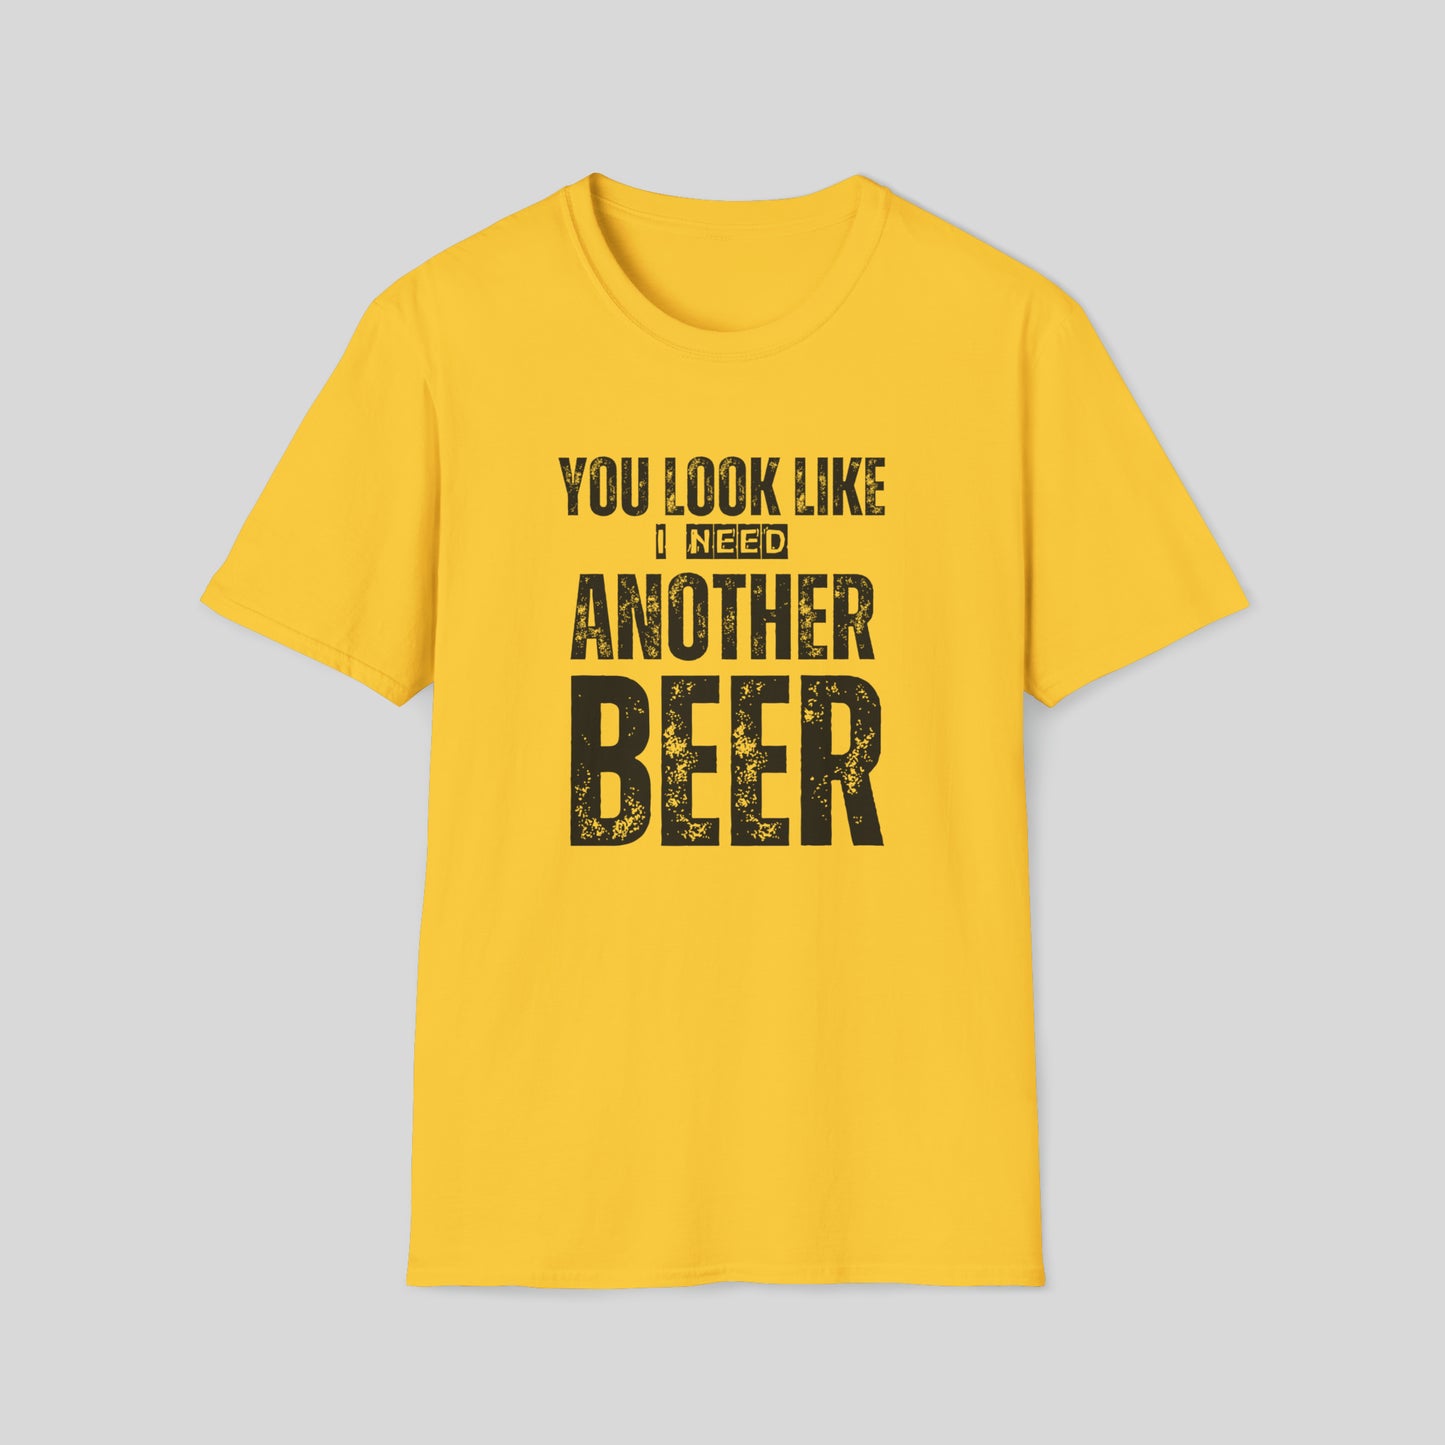 YOU LOOK LIKE I NEED ANOTHER BEER T-SHIRT